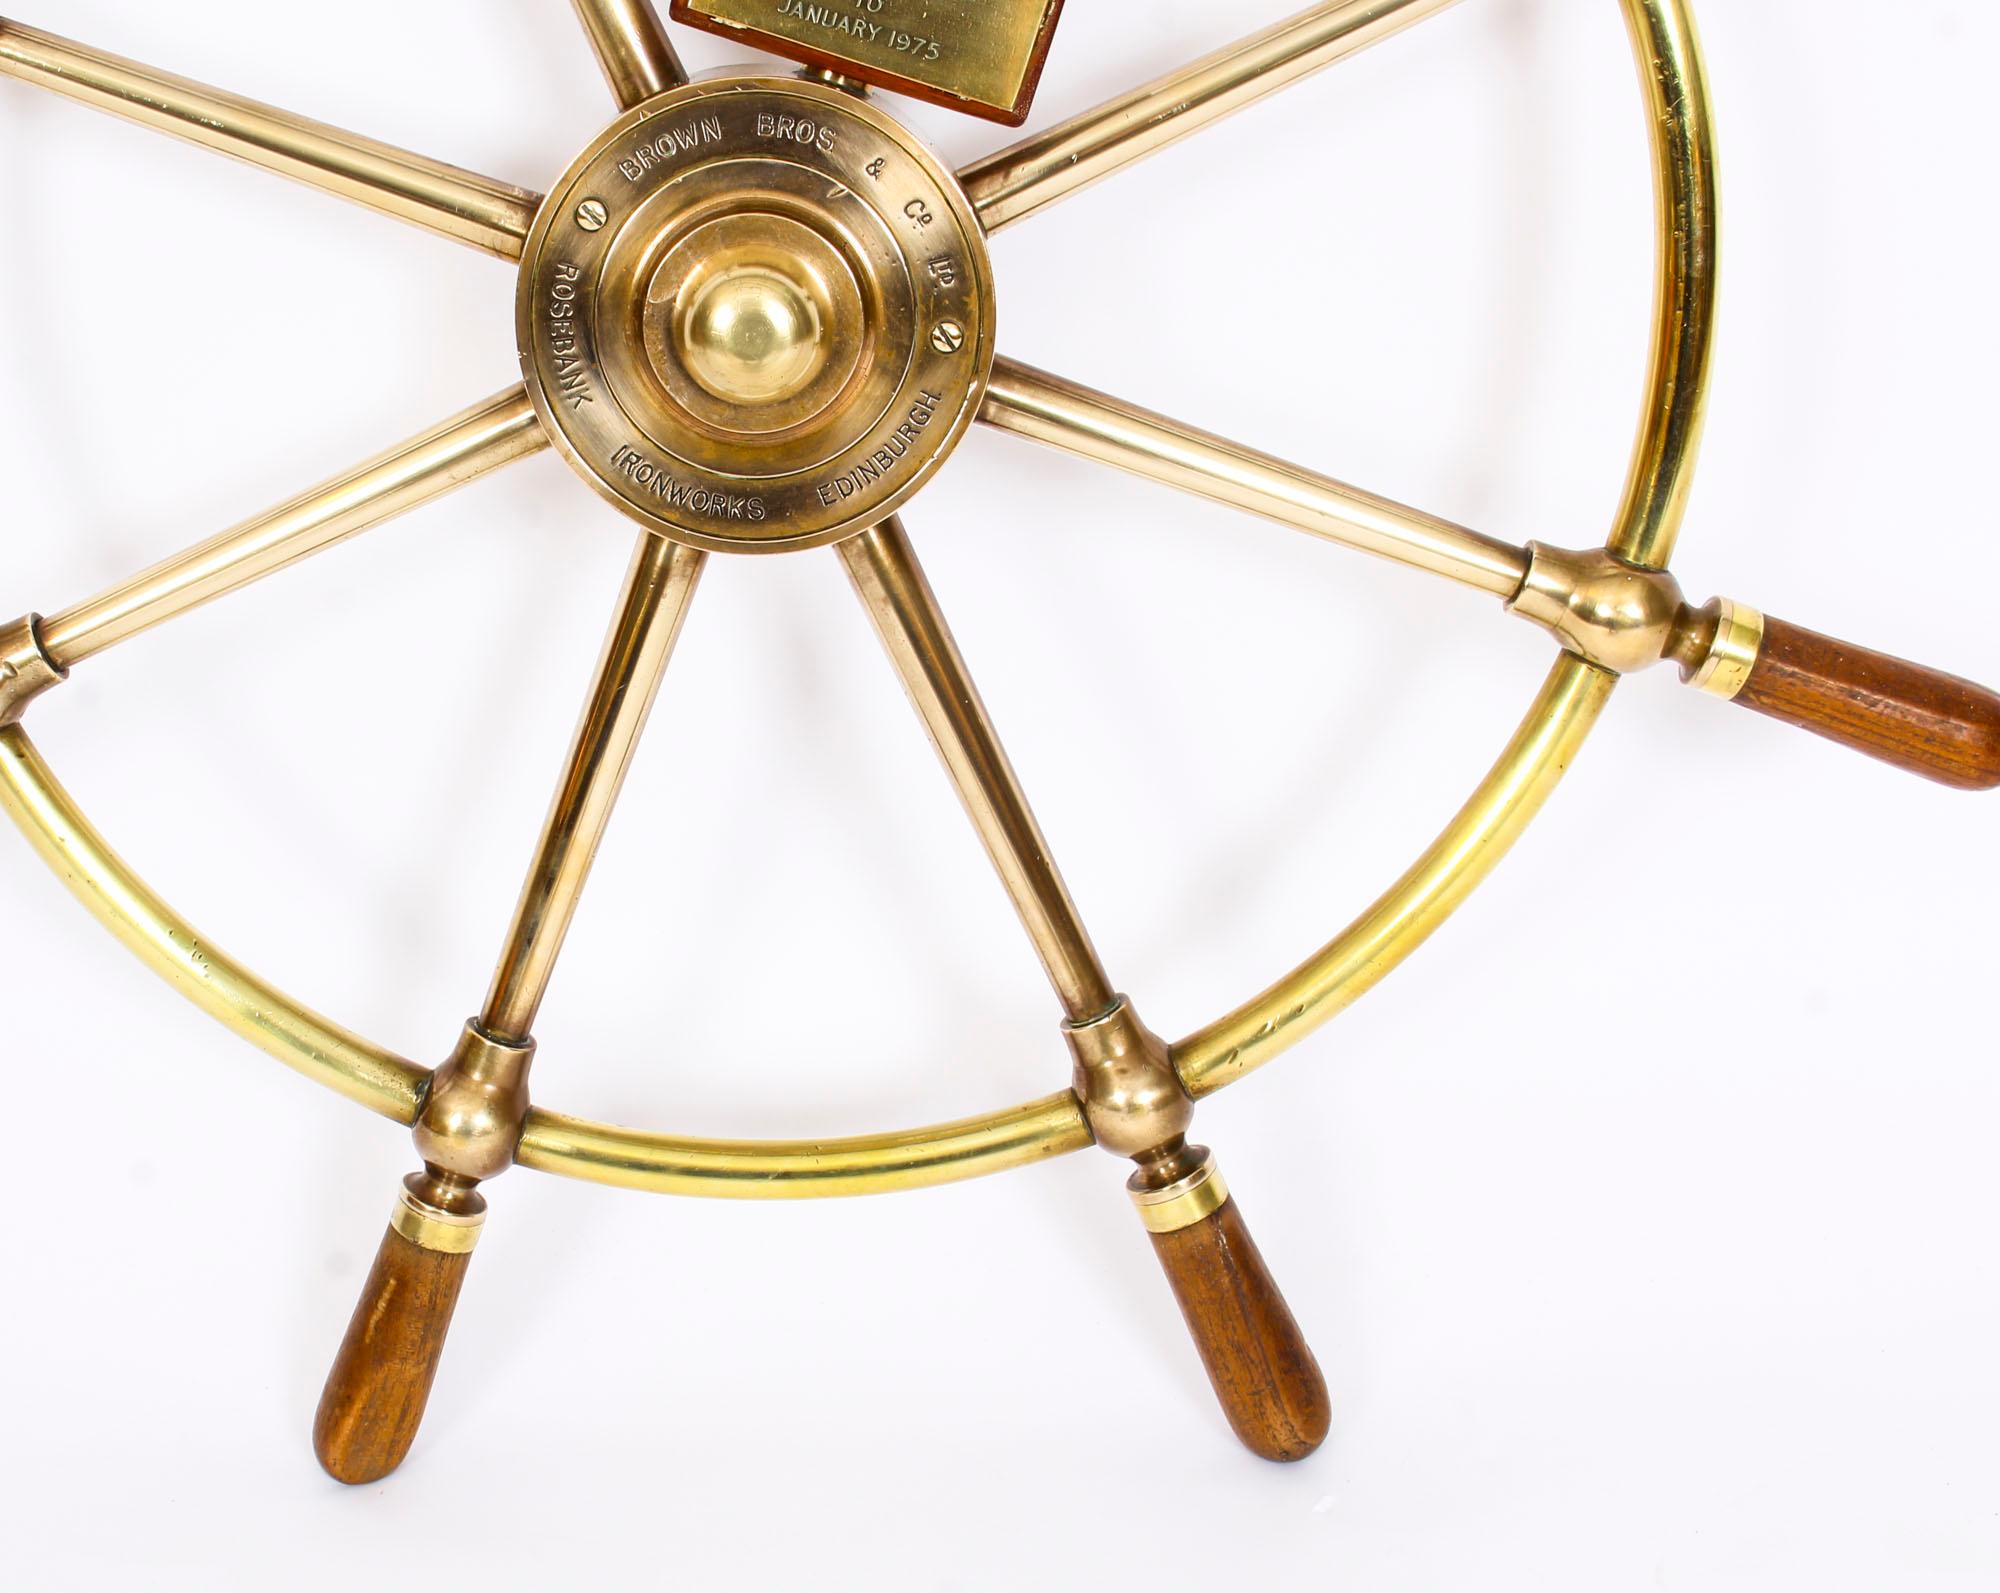 Mid-20th Century Midcentury 8-Spoke Brass and Walnut Ships Wheel HMS Whitby Brown Bros